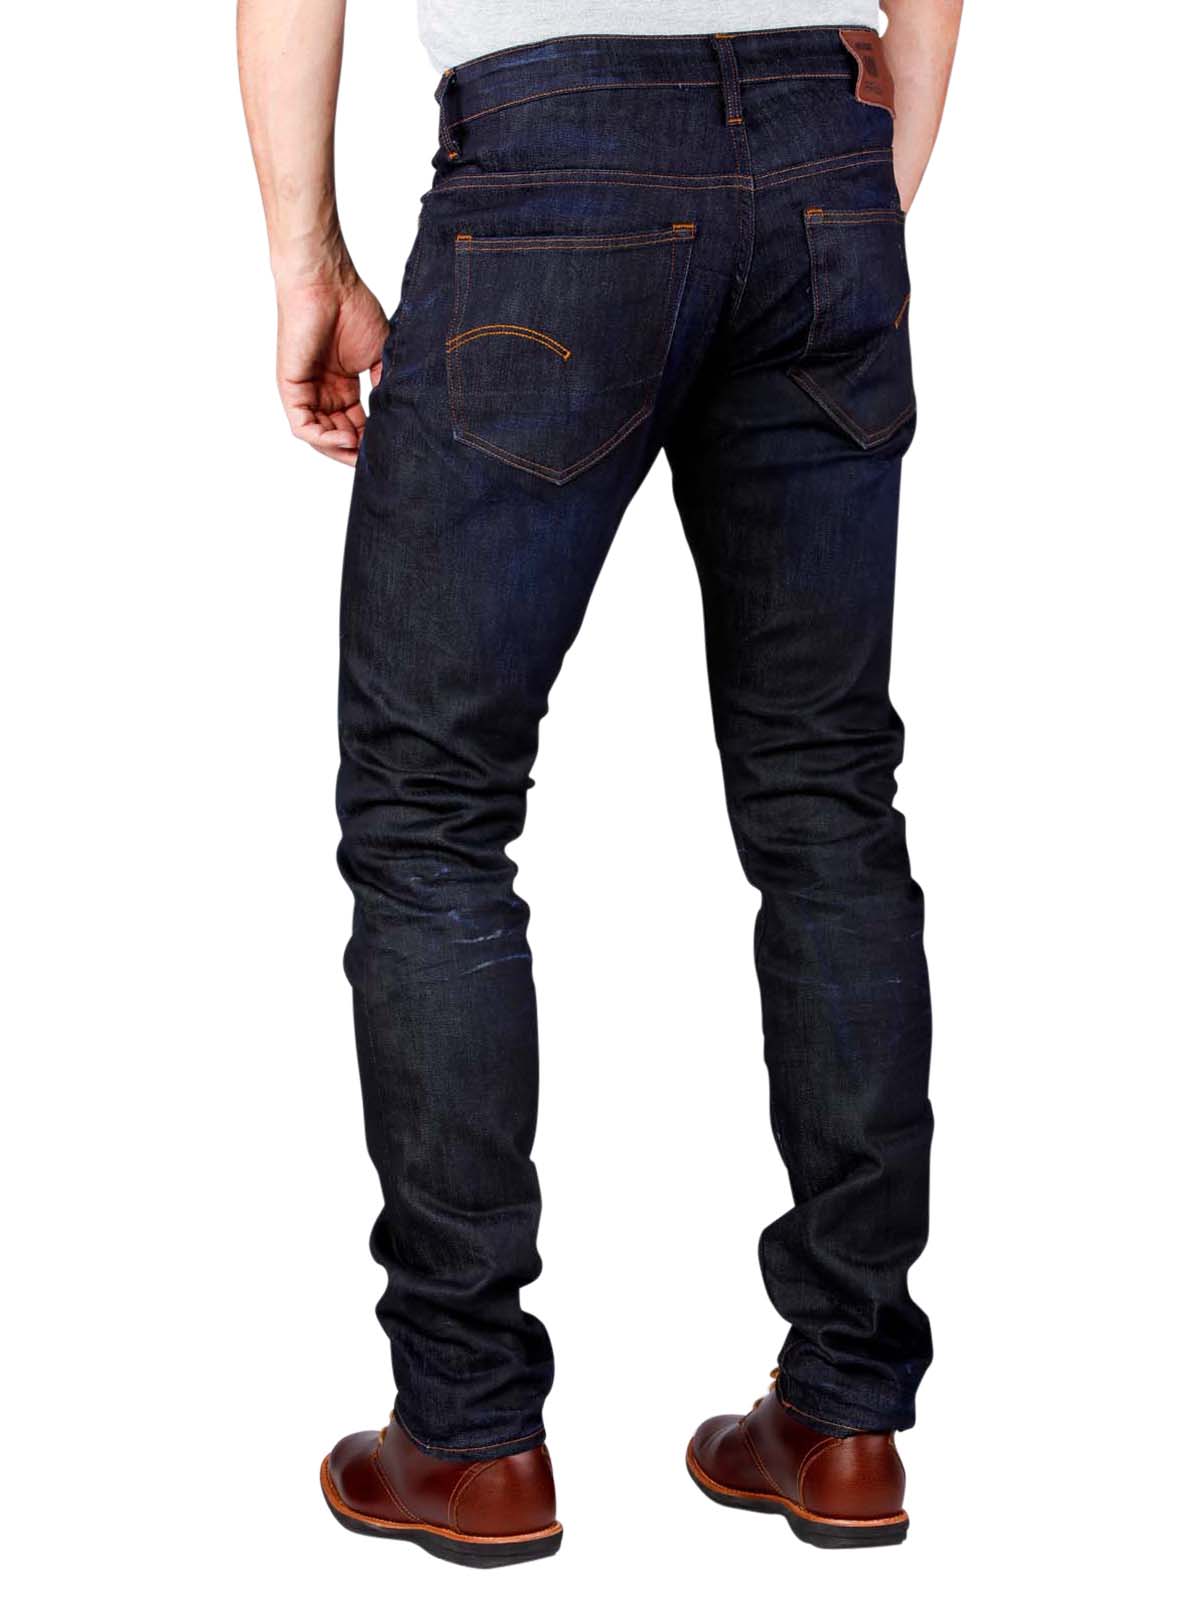 g star raw 3301 tapered mens jeans